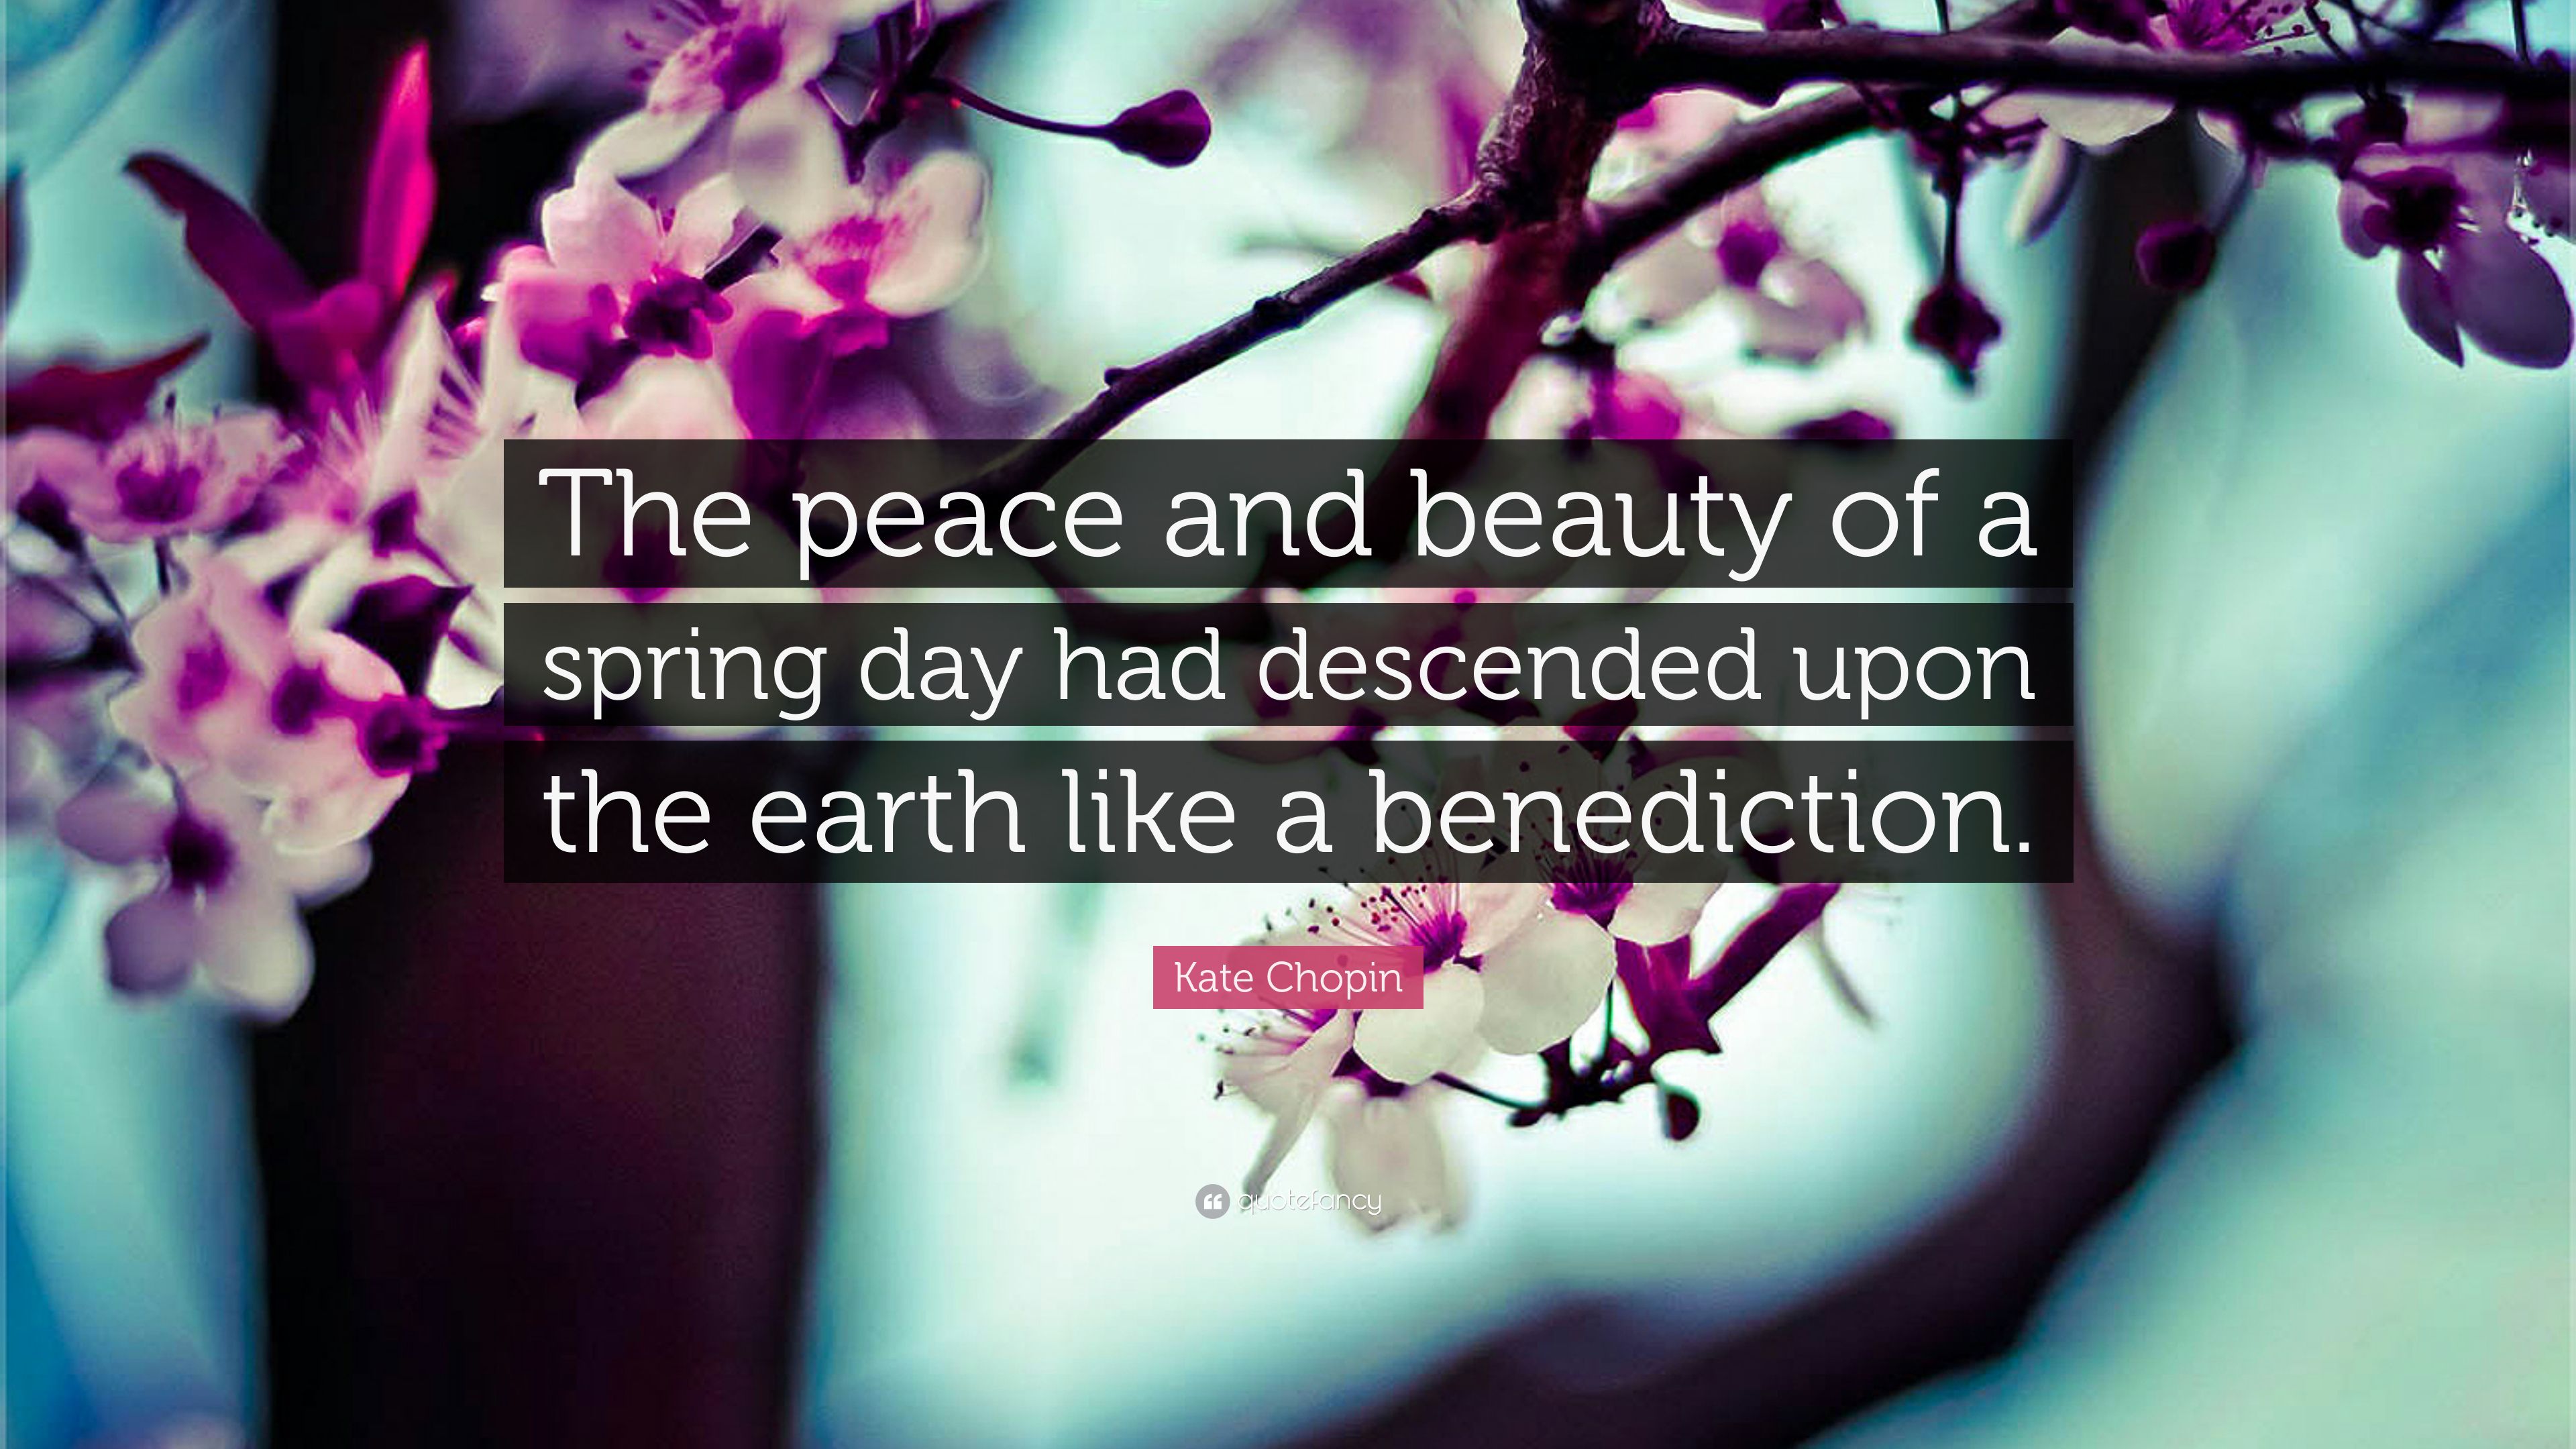 Kate Chopin Quote: “The peace and beauty of a spring day had